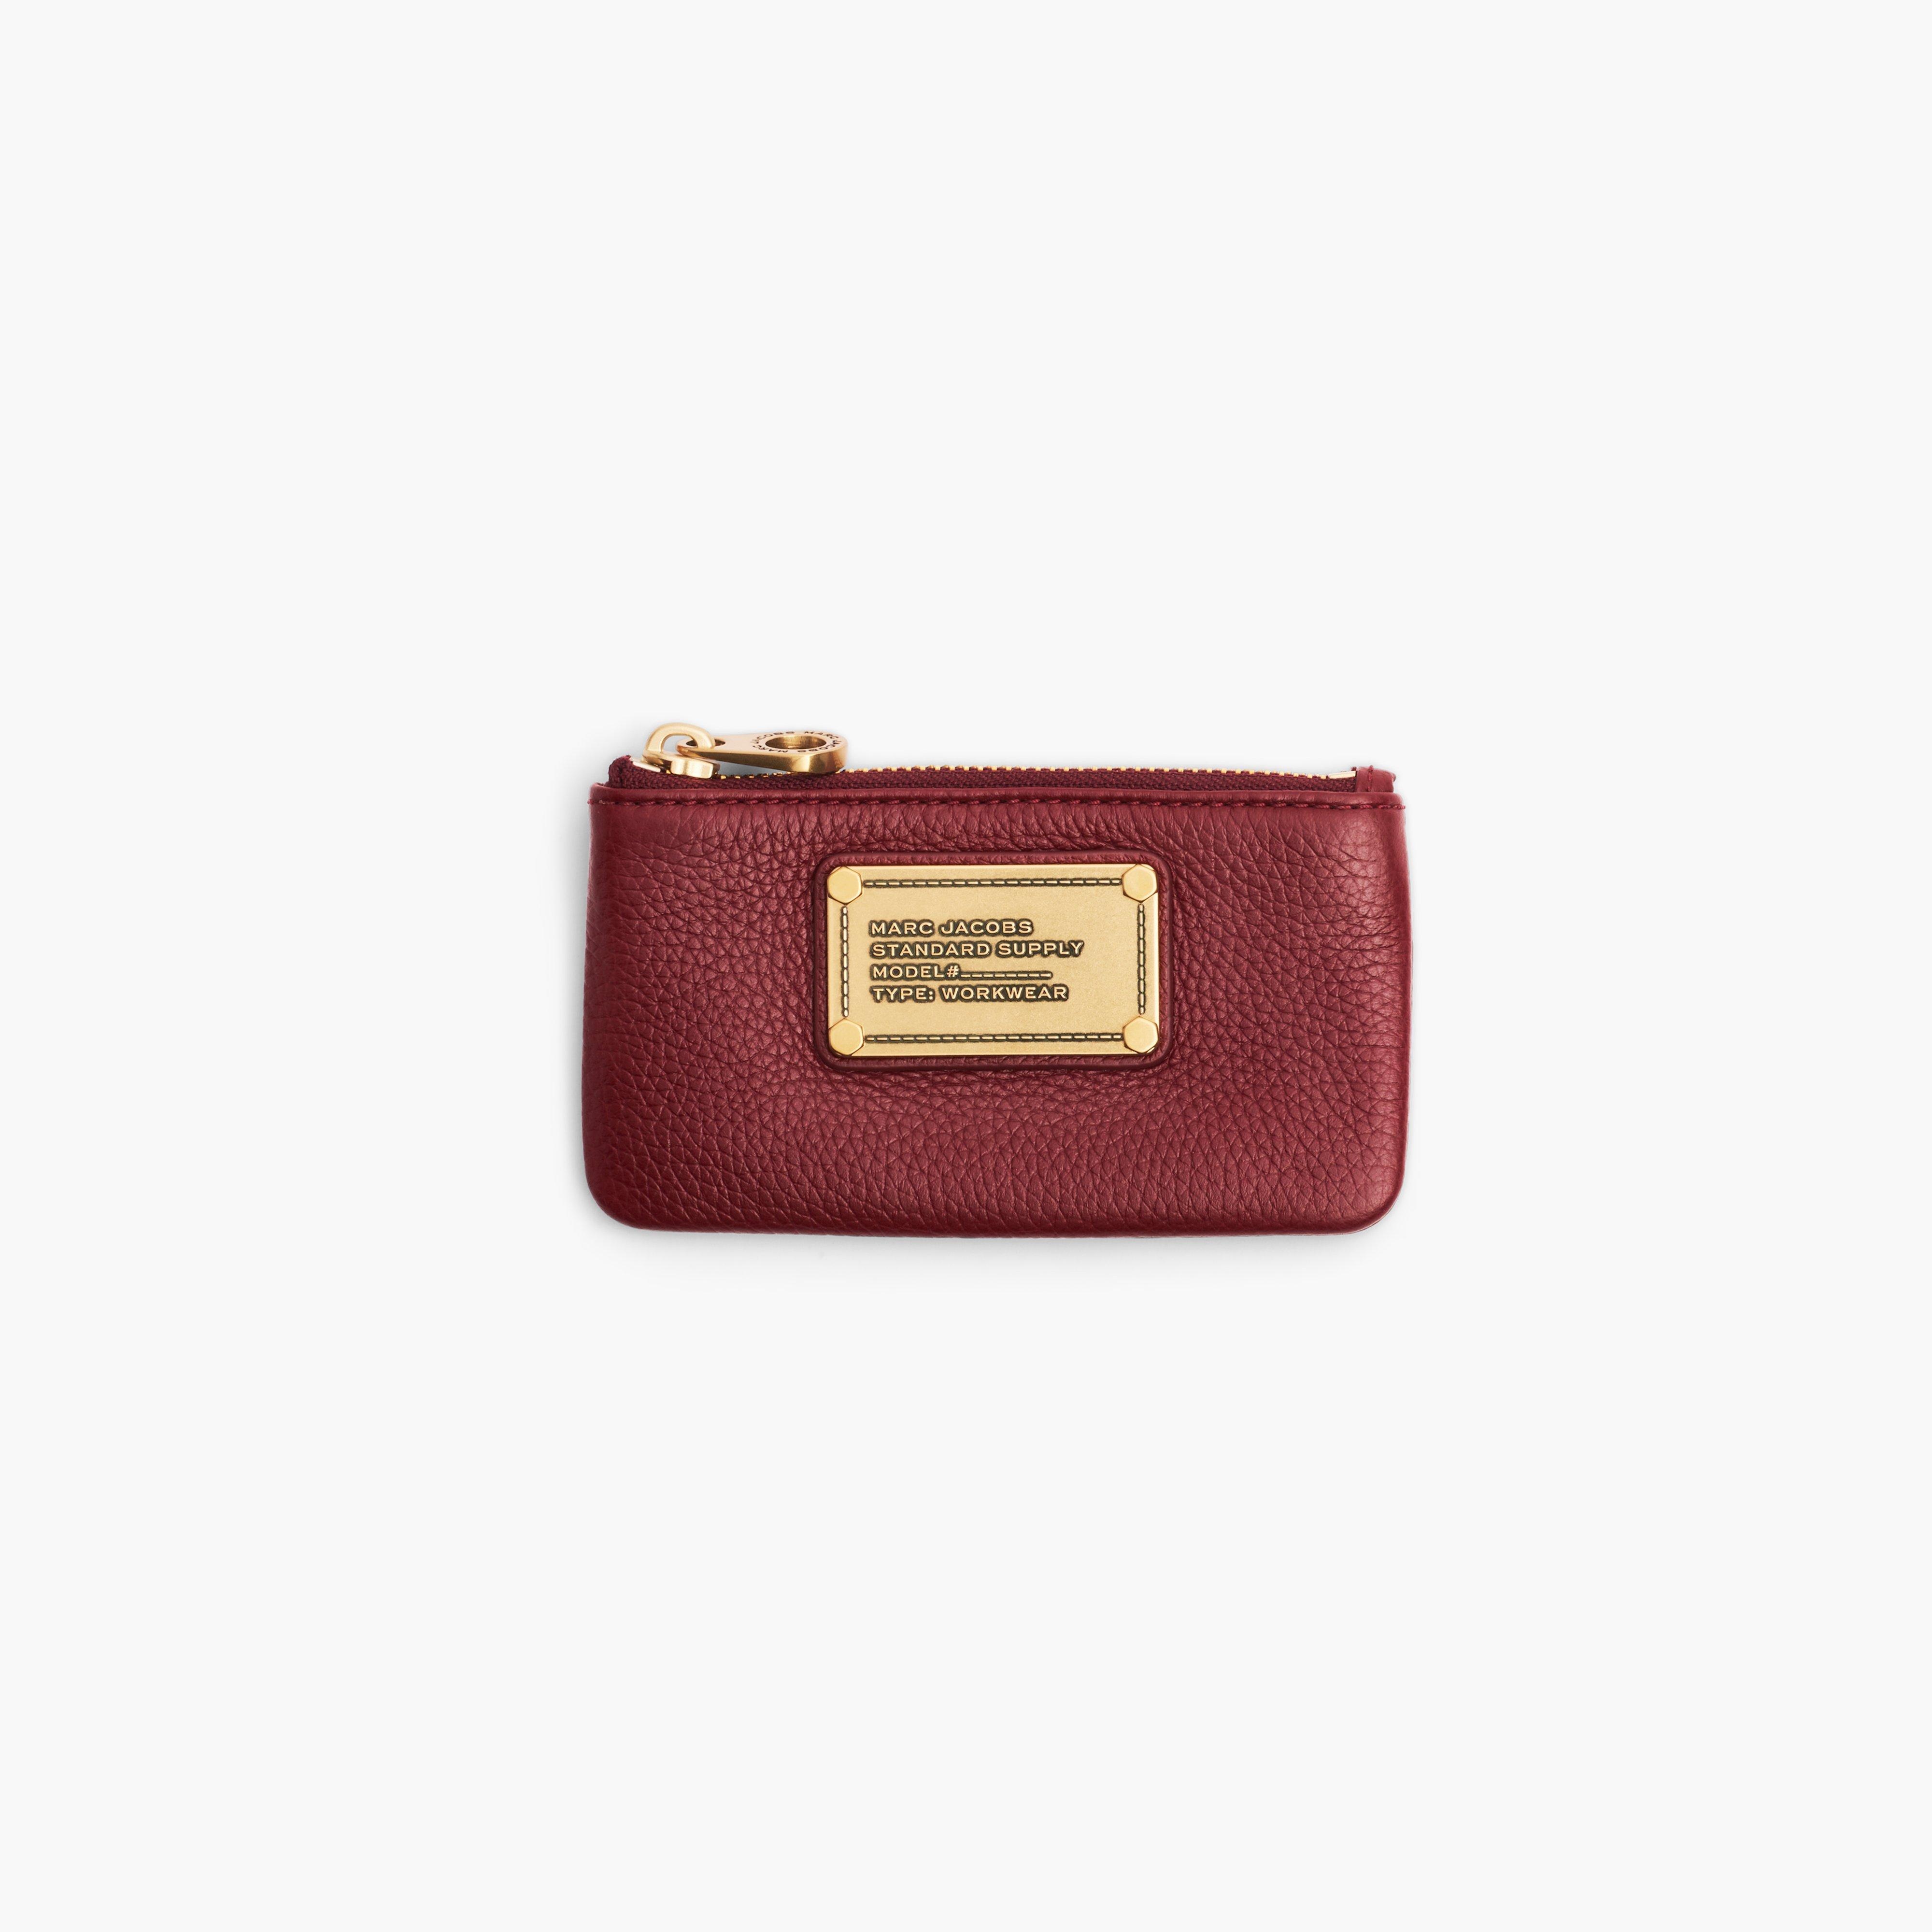 RE-EDITION CLASSIC Q KEY POUCH - 1